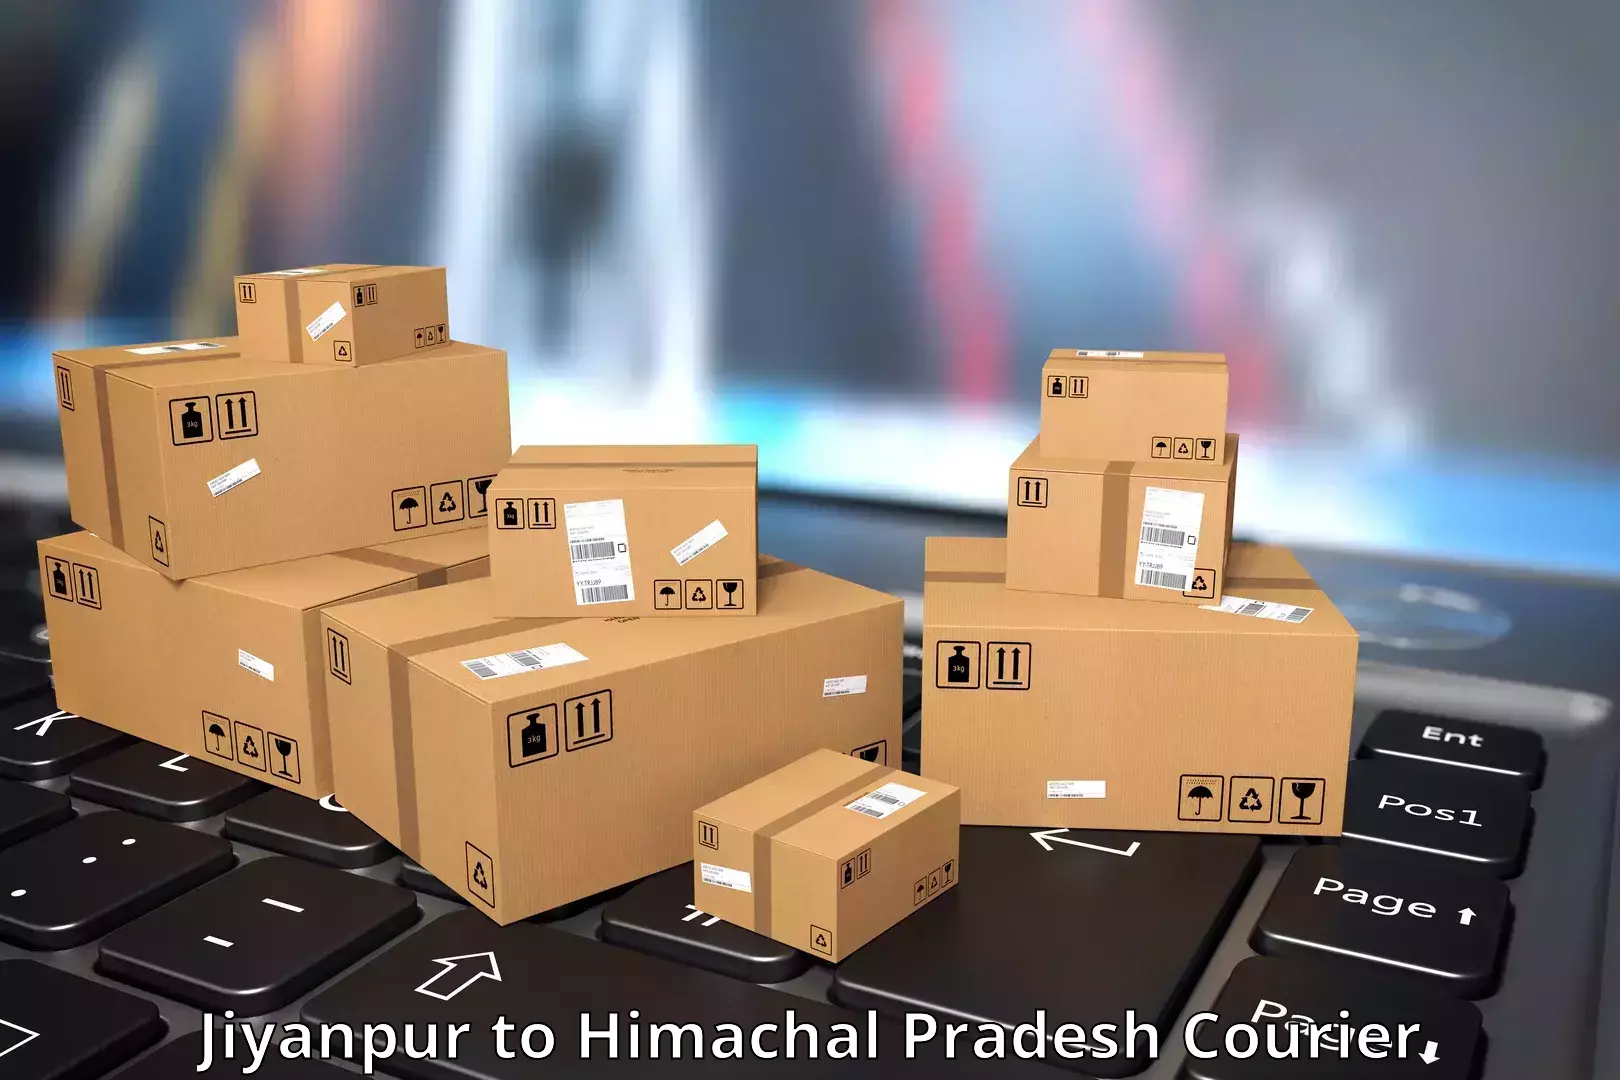 24-hour courier service in Jiyanpur to Himachal Pradesh